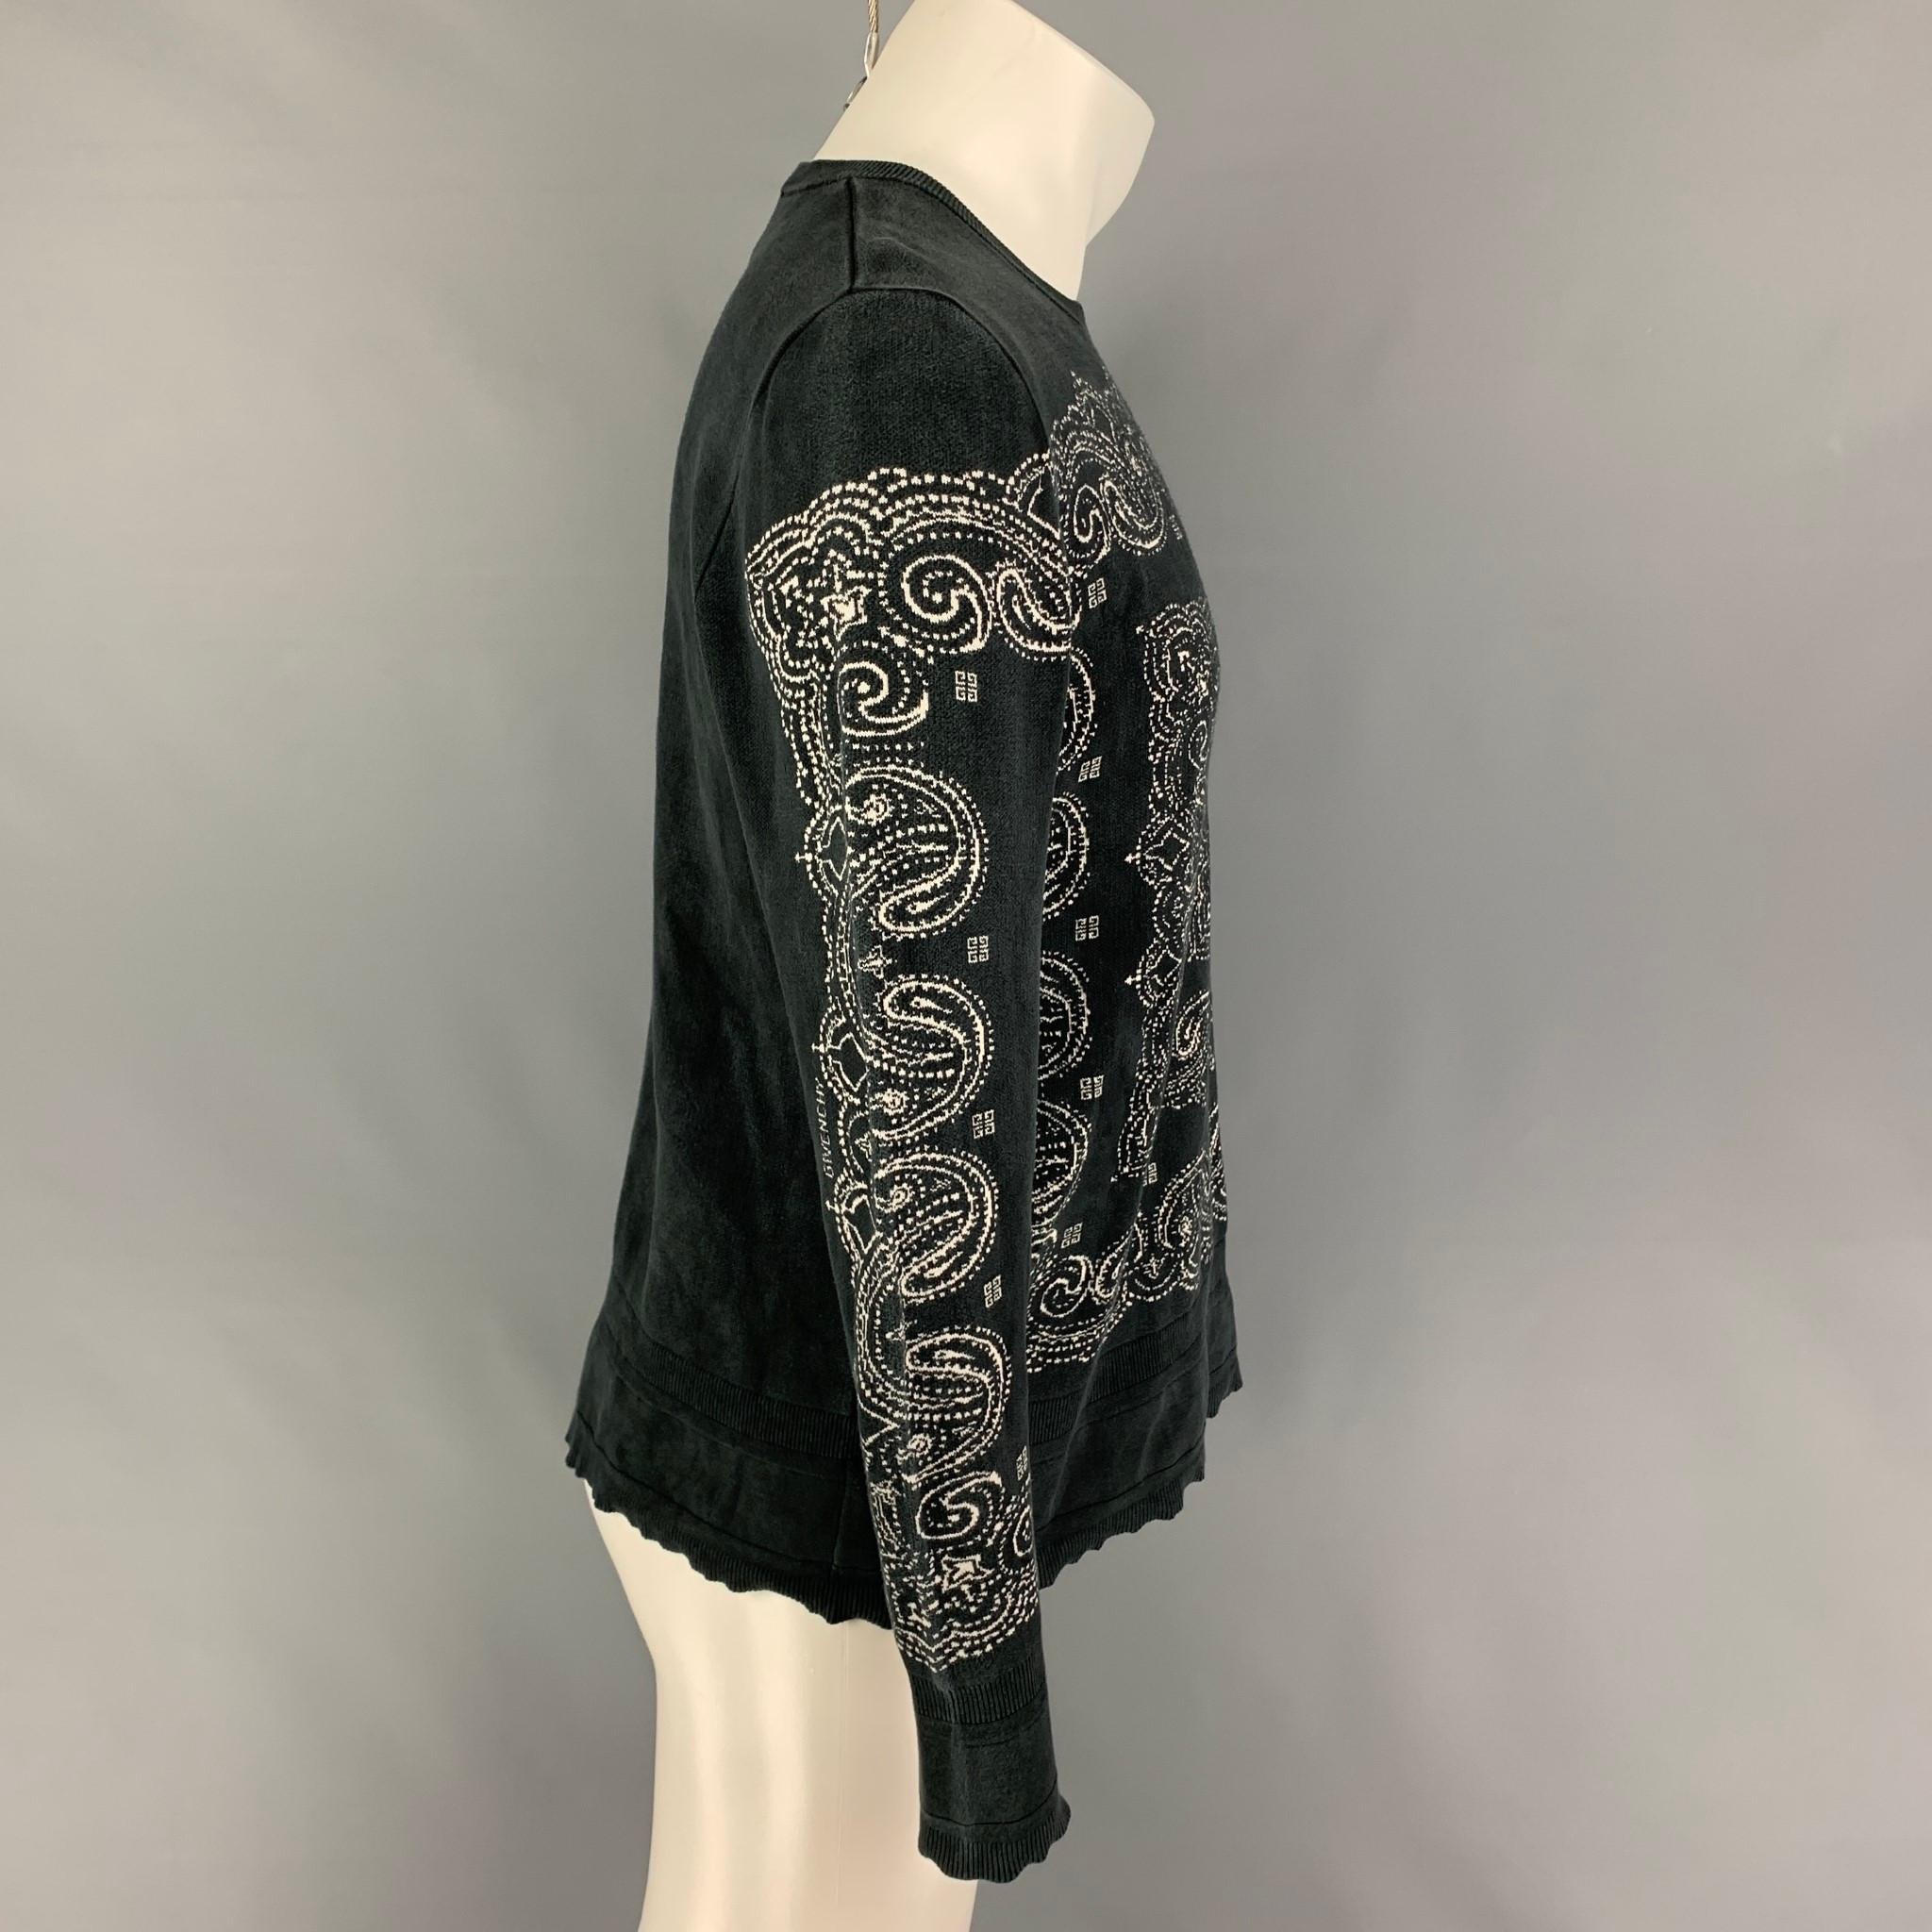 GIVENCHY pullover comes in a black & white silk featuring a paisley print throughout, distressed, and a crew-neck. Made in England. 

Good Pre-Owned Condition.
Marked: S
Original Retail Price: $1,800.00

Measurements:

Shoulder: 17 in.
Chest: 40